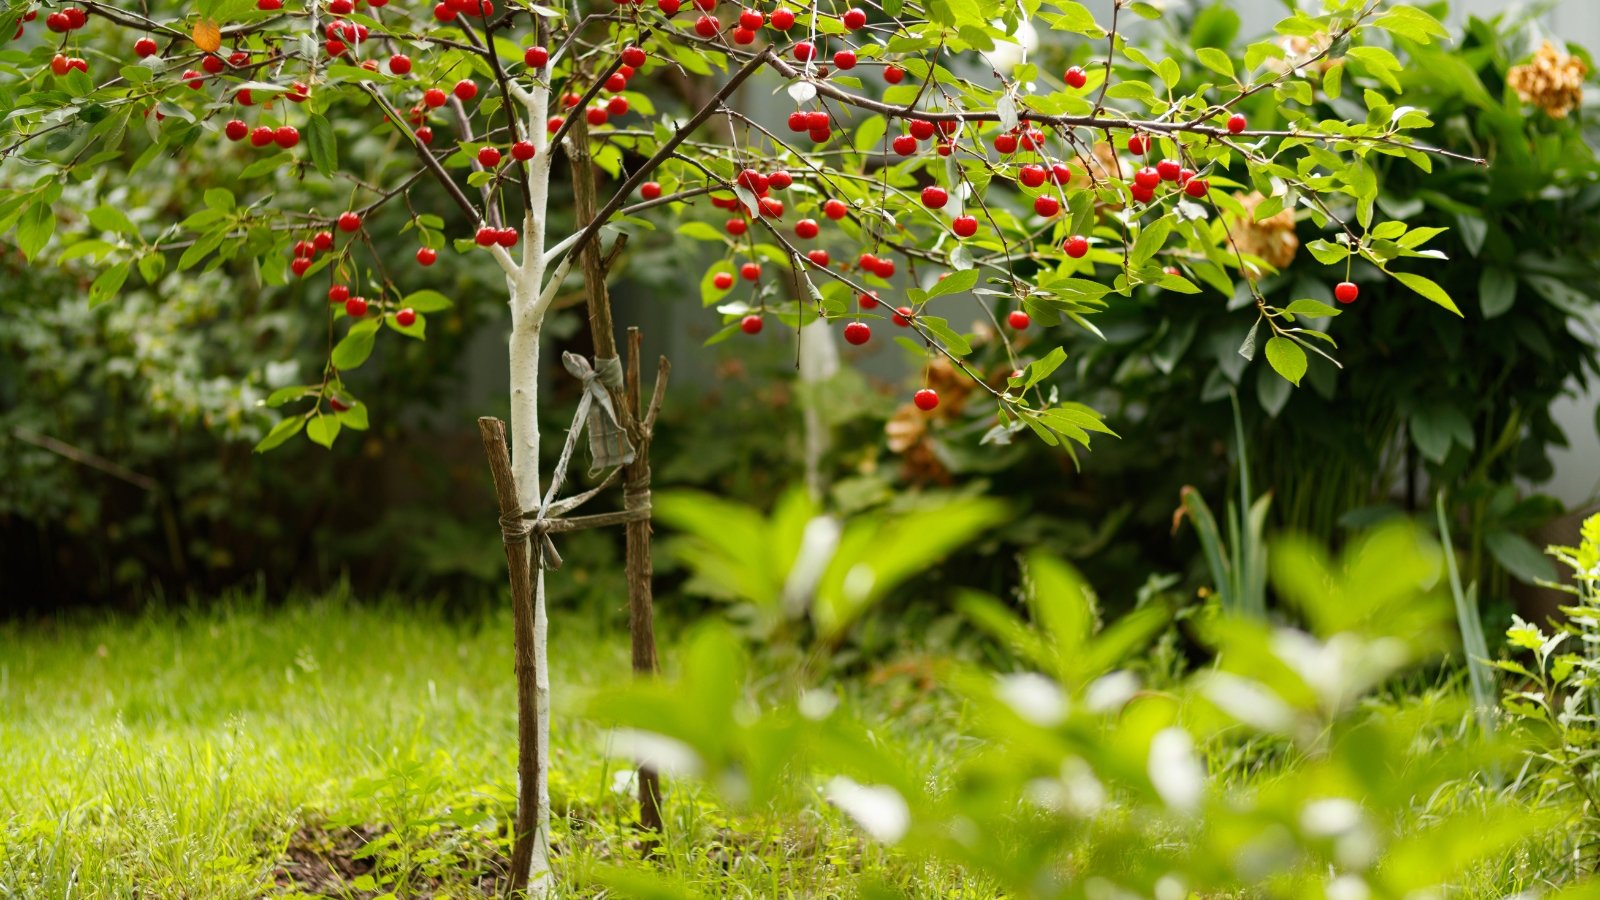 The dwarf cherry tree showcases compact, spreading branches adorned with glossy green leaves and clusters of bright red cherries hanging from thin branches.